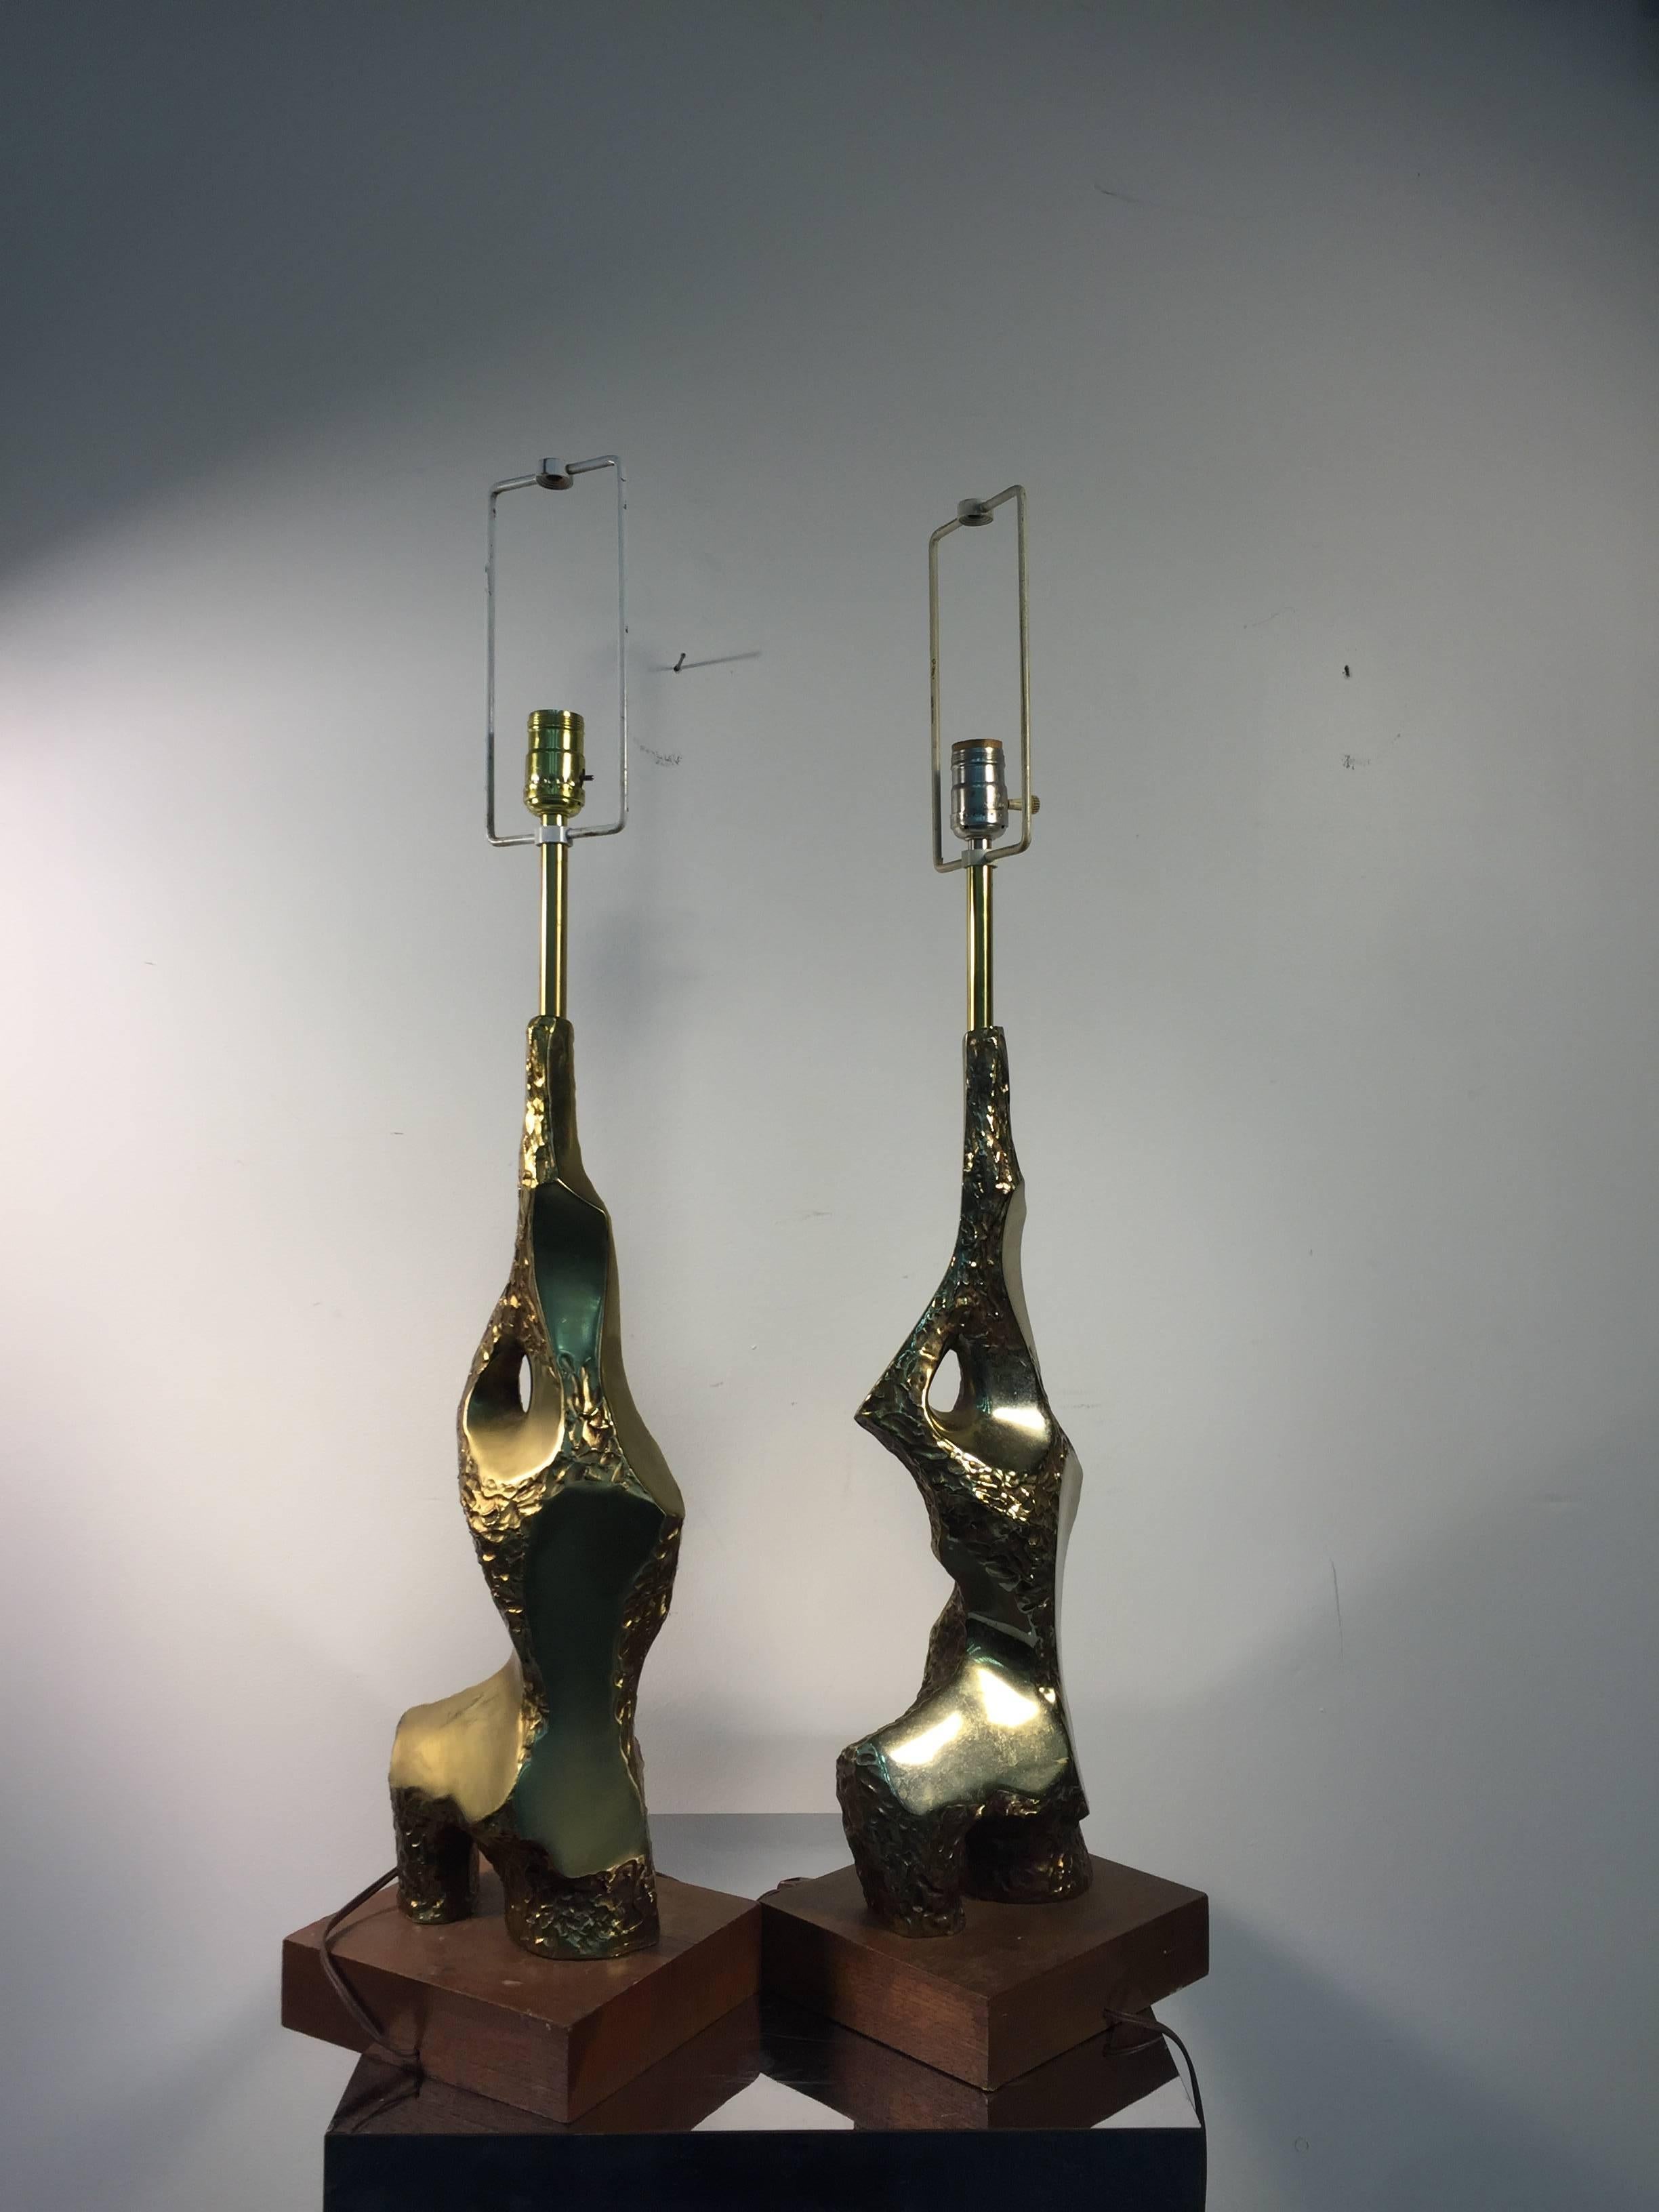 Pair of brass Brutalist table lamps on wooden bases by designer Maurizio Tempestini, circa 1970.